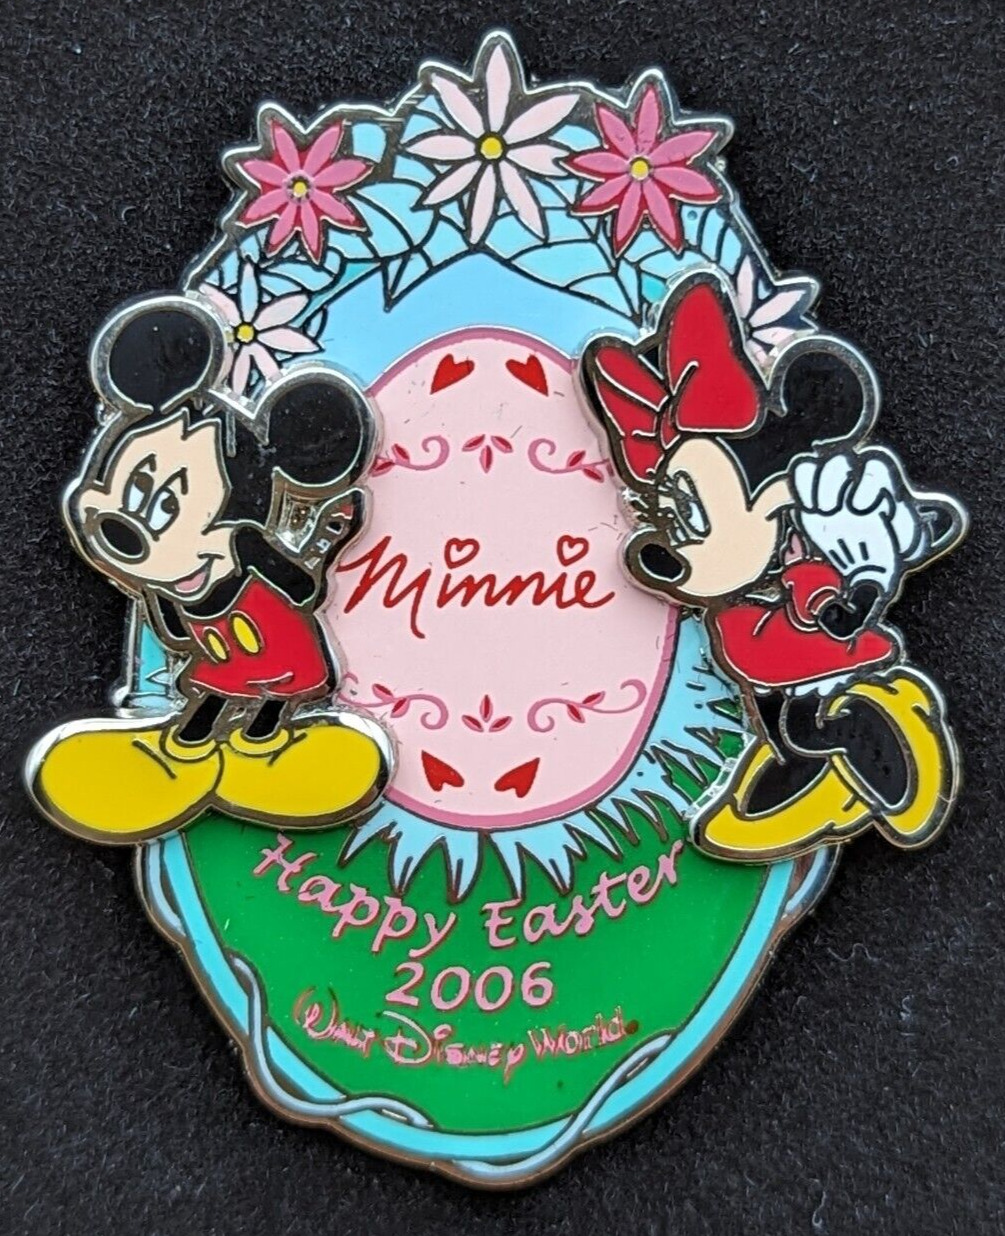 Disney Happy Easter 2006 Mickey & Minnie Mouse Pin PP 45750 LE 3500